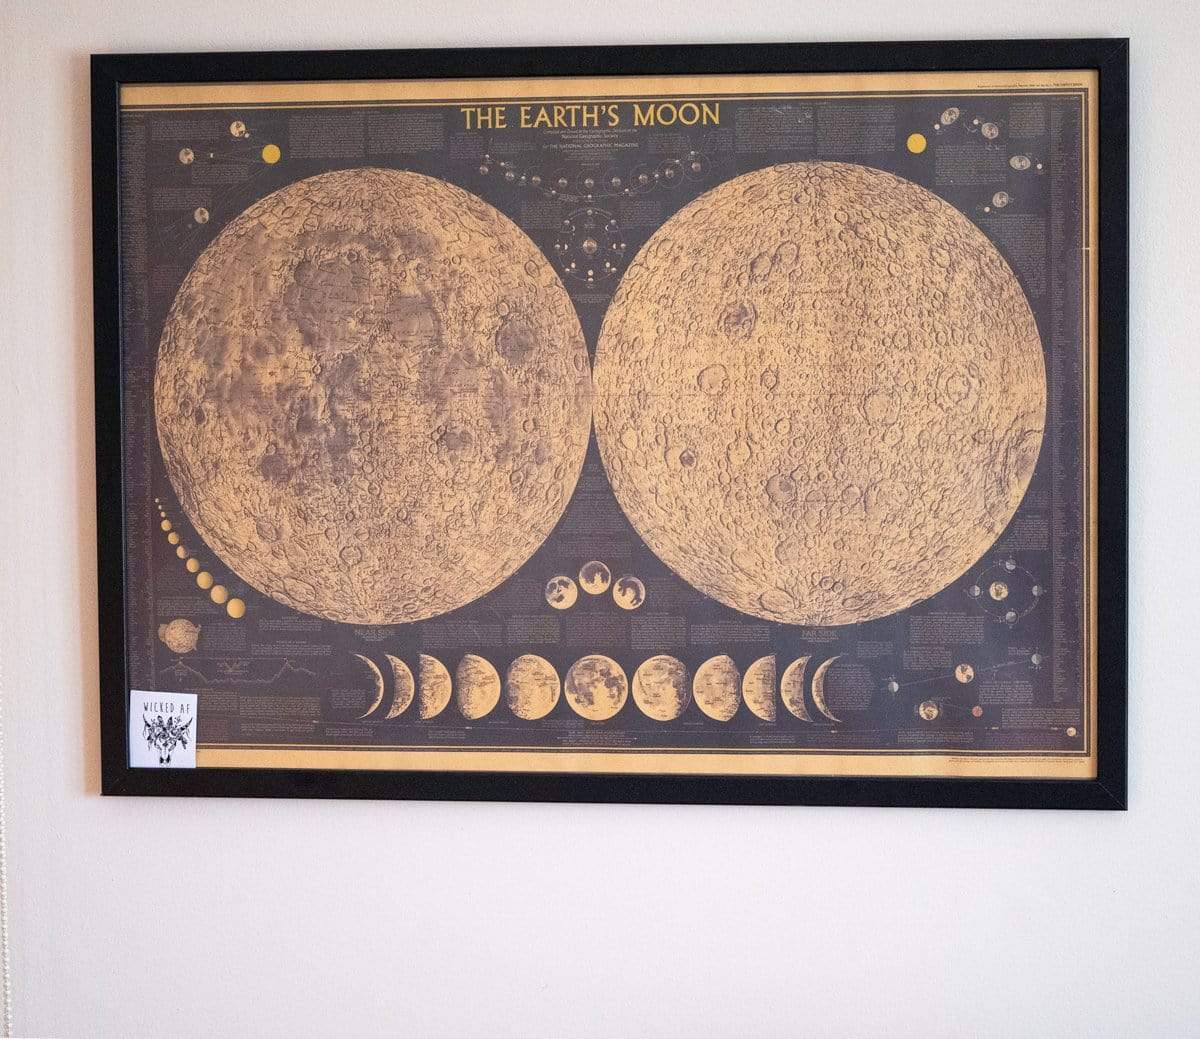 Earth's Moon Poster - Version A